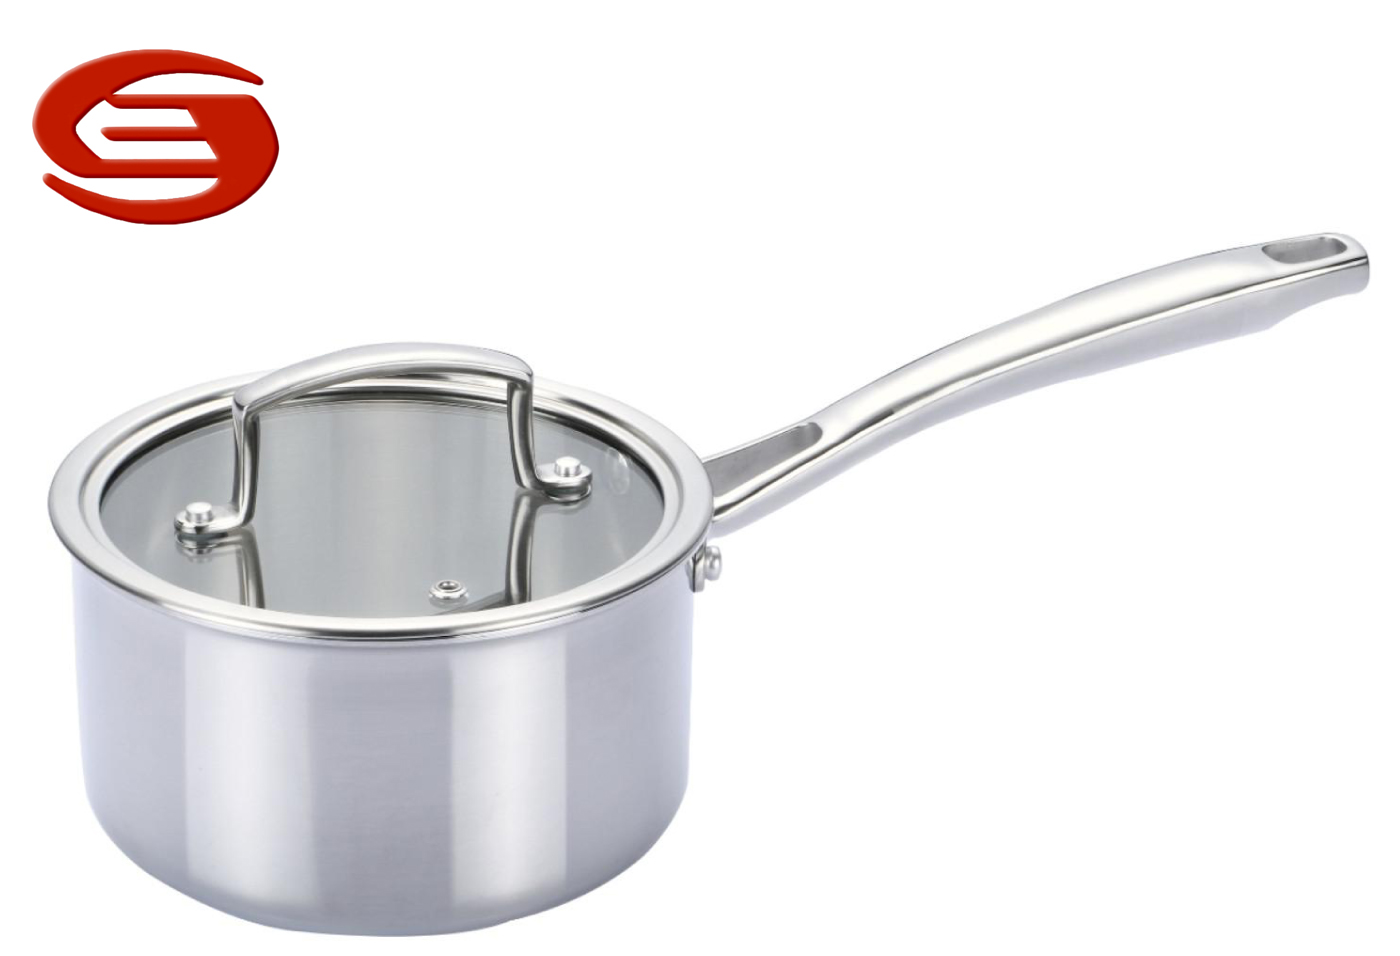 Tri-ply Stainless steel Saucepan with glass lid